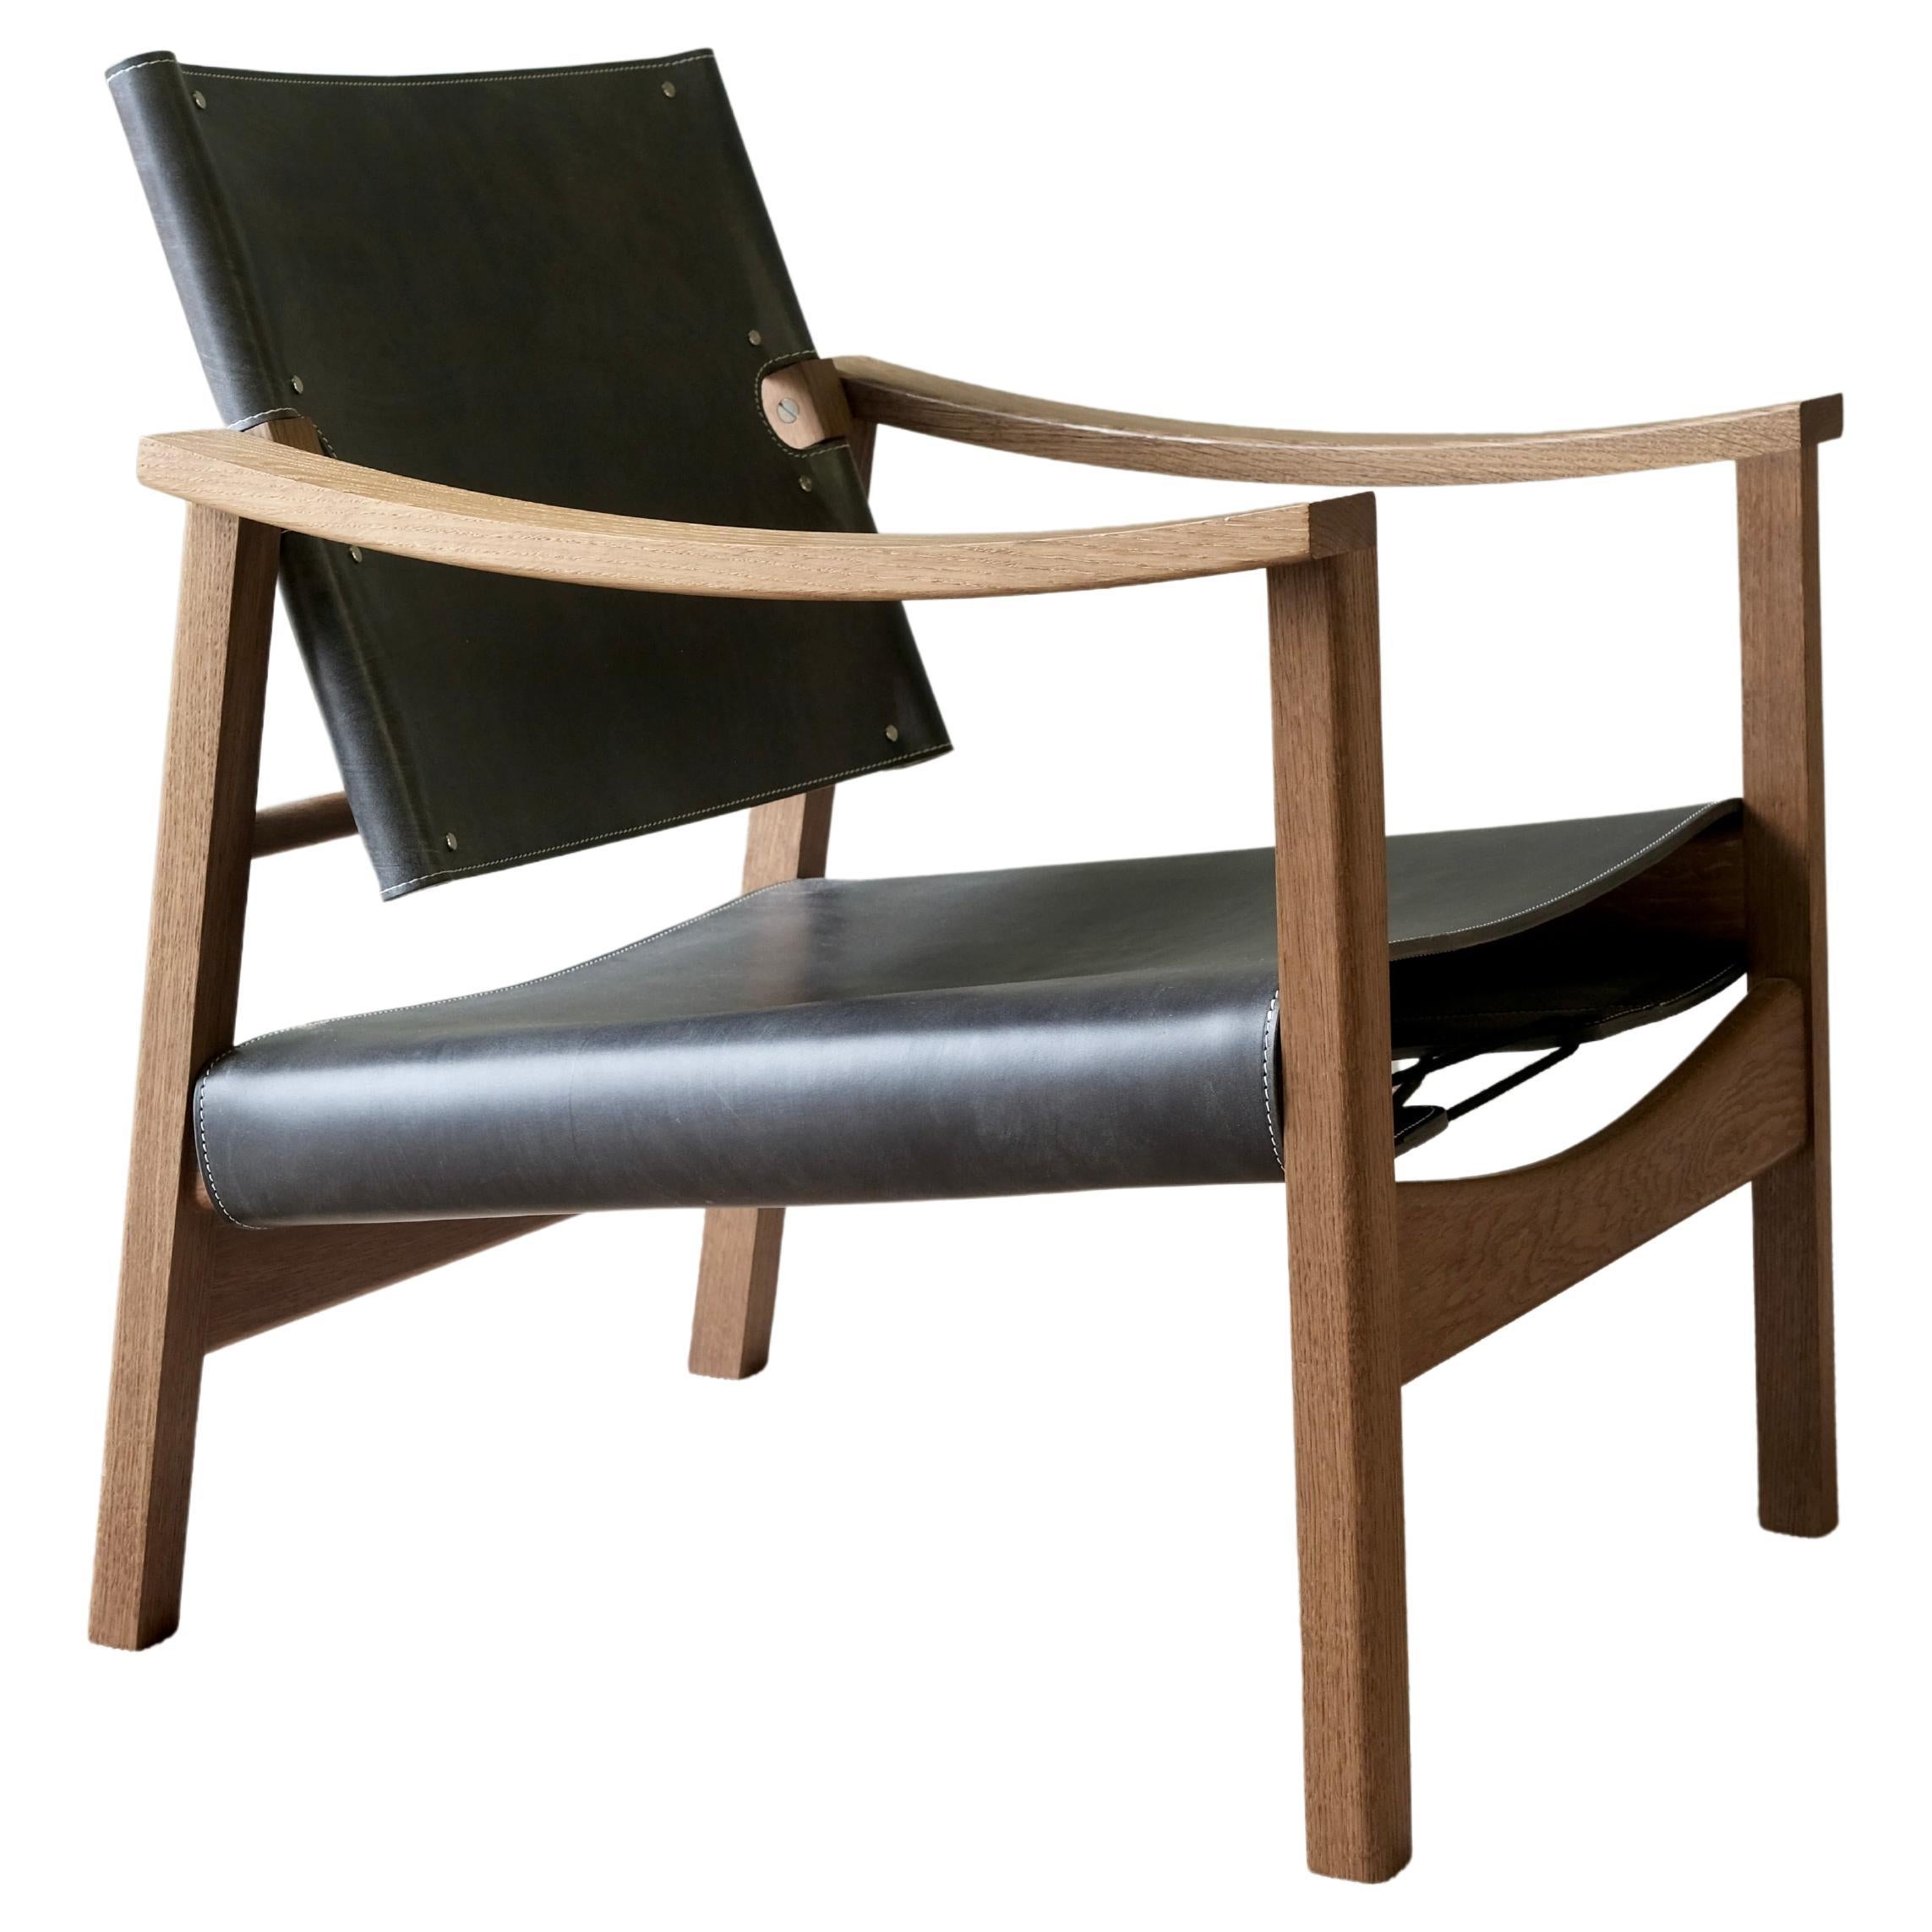 Camber Chair - Black bridle leather and fumed oak For Sale